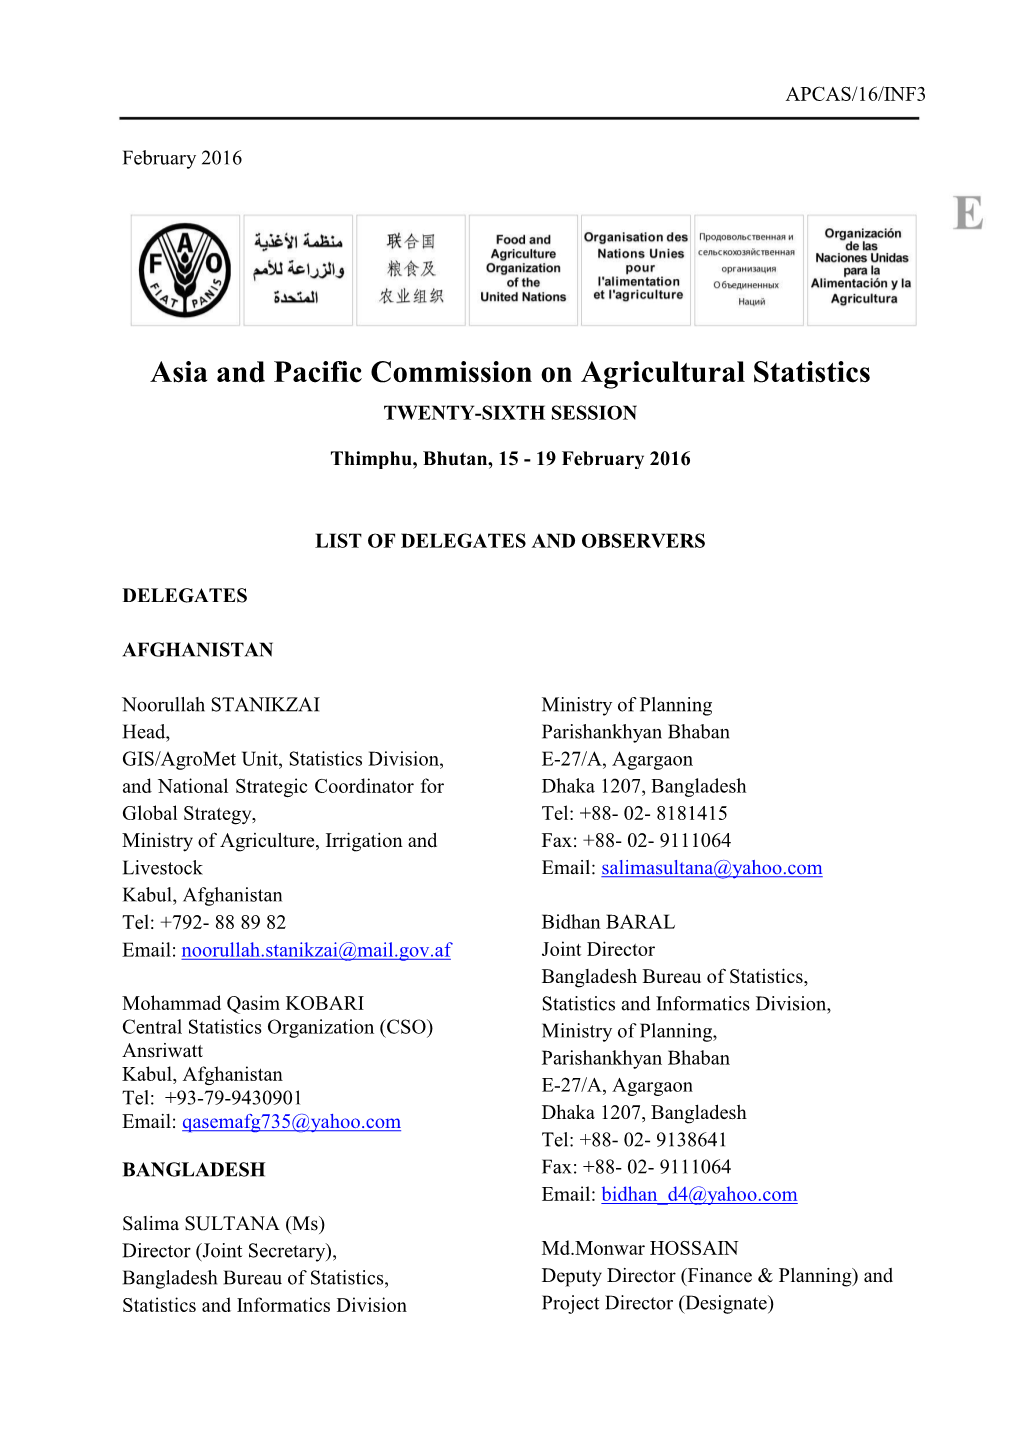 Asia and Pacific Commission on Agricultural Statistics